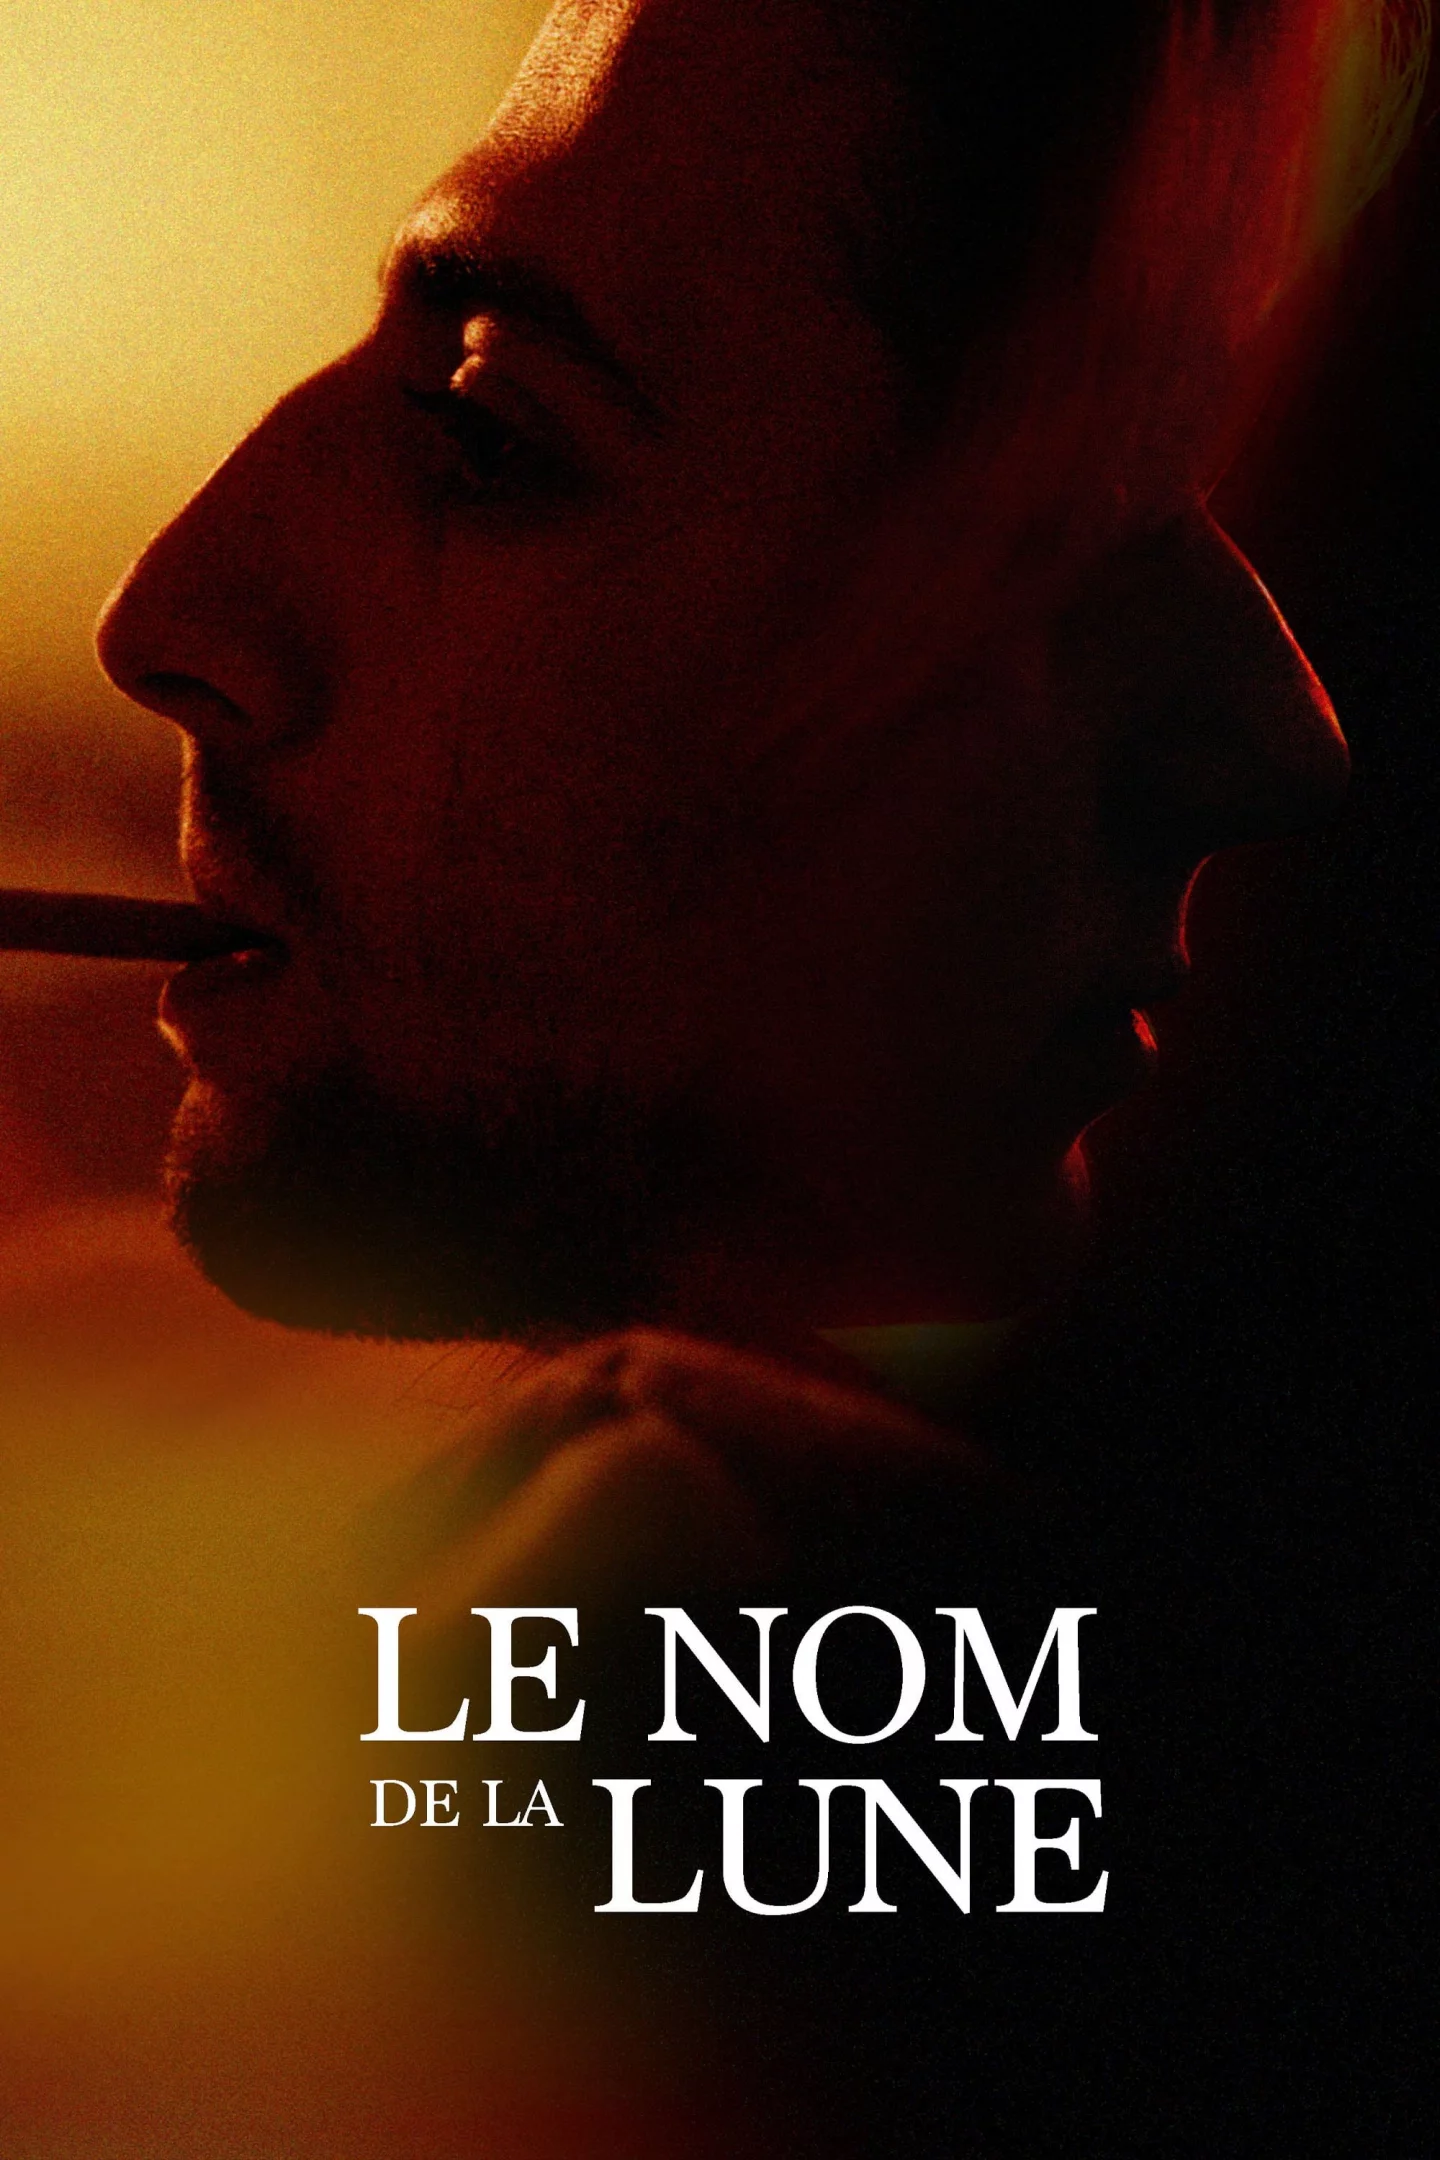 Photo 2 du film : In the name of the moon